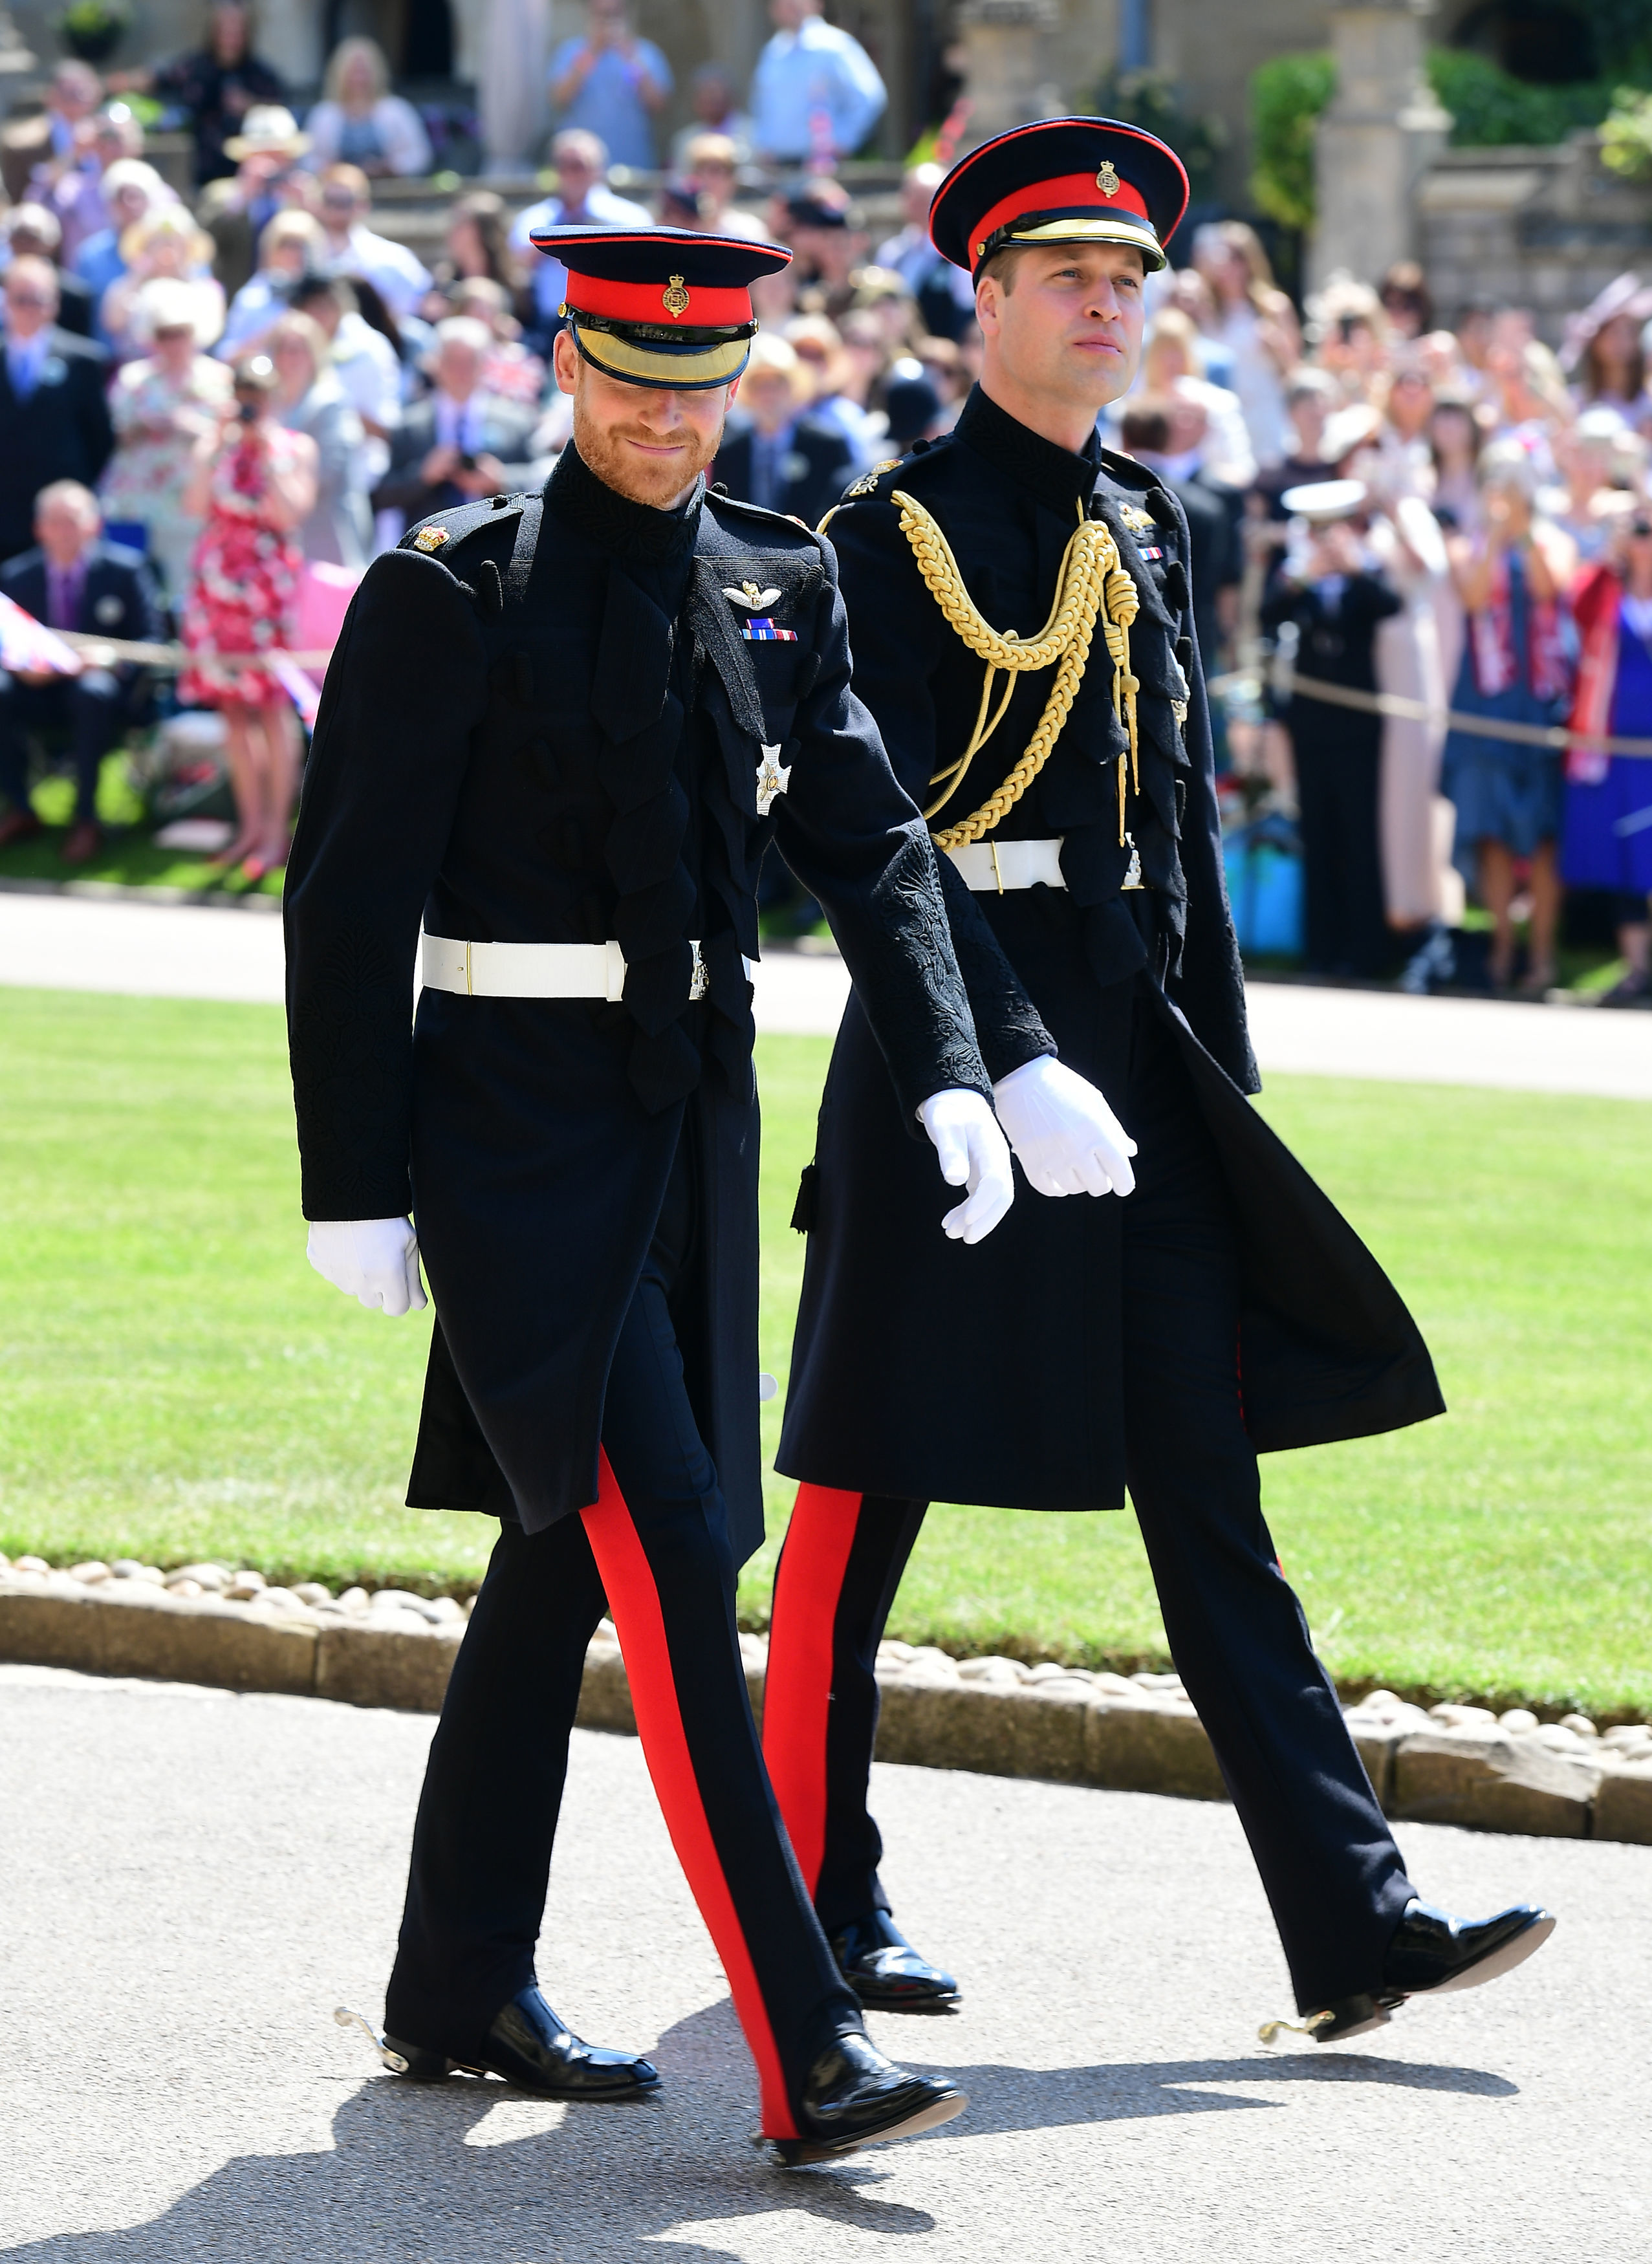 Prince Harry and Prince William arriving at St. George's Chapel ahead of Harry's royal wedding